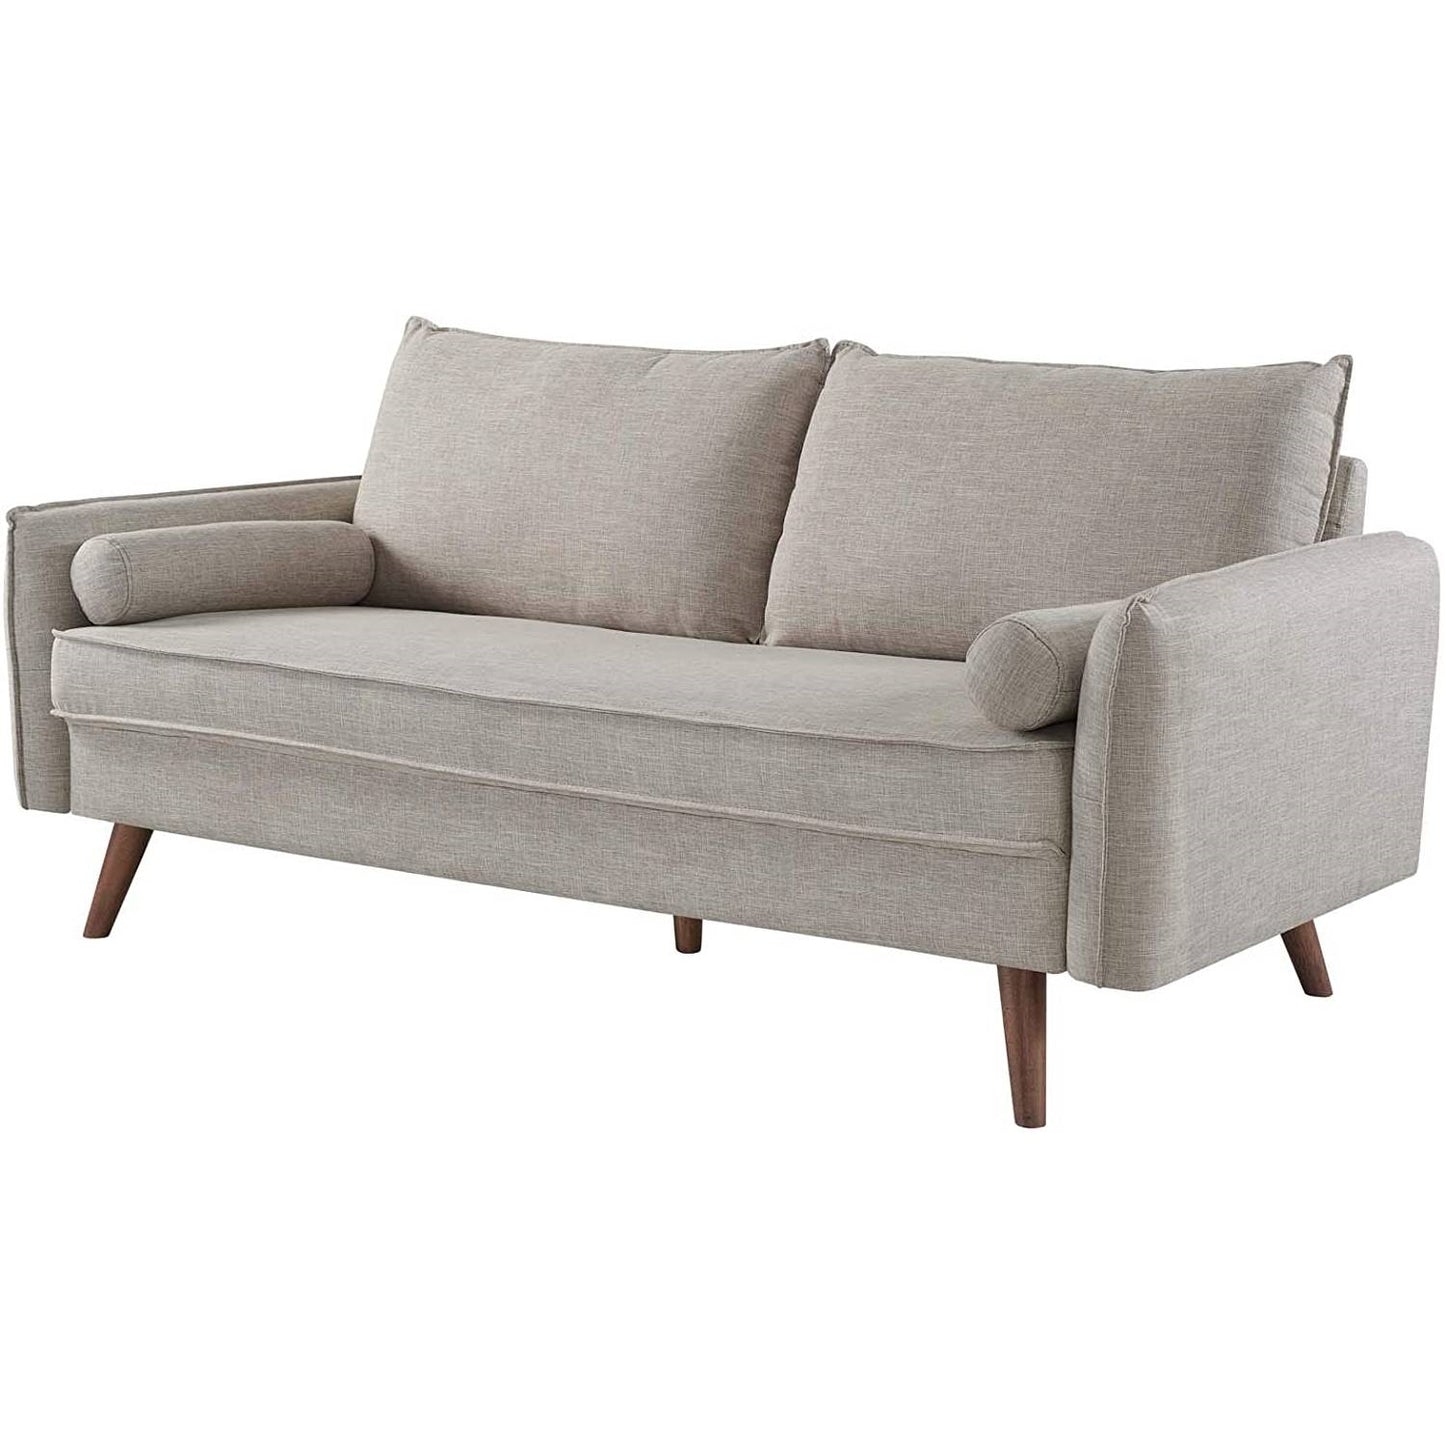 Modern Couch Beige Upholstered Sofa with with Mid-Century Style Wood Legs